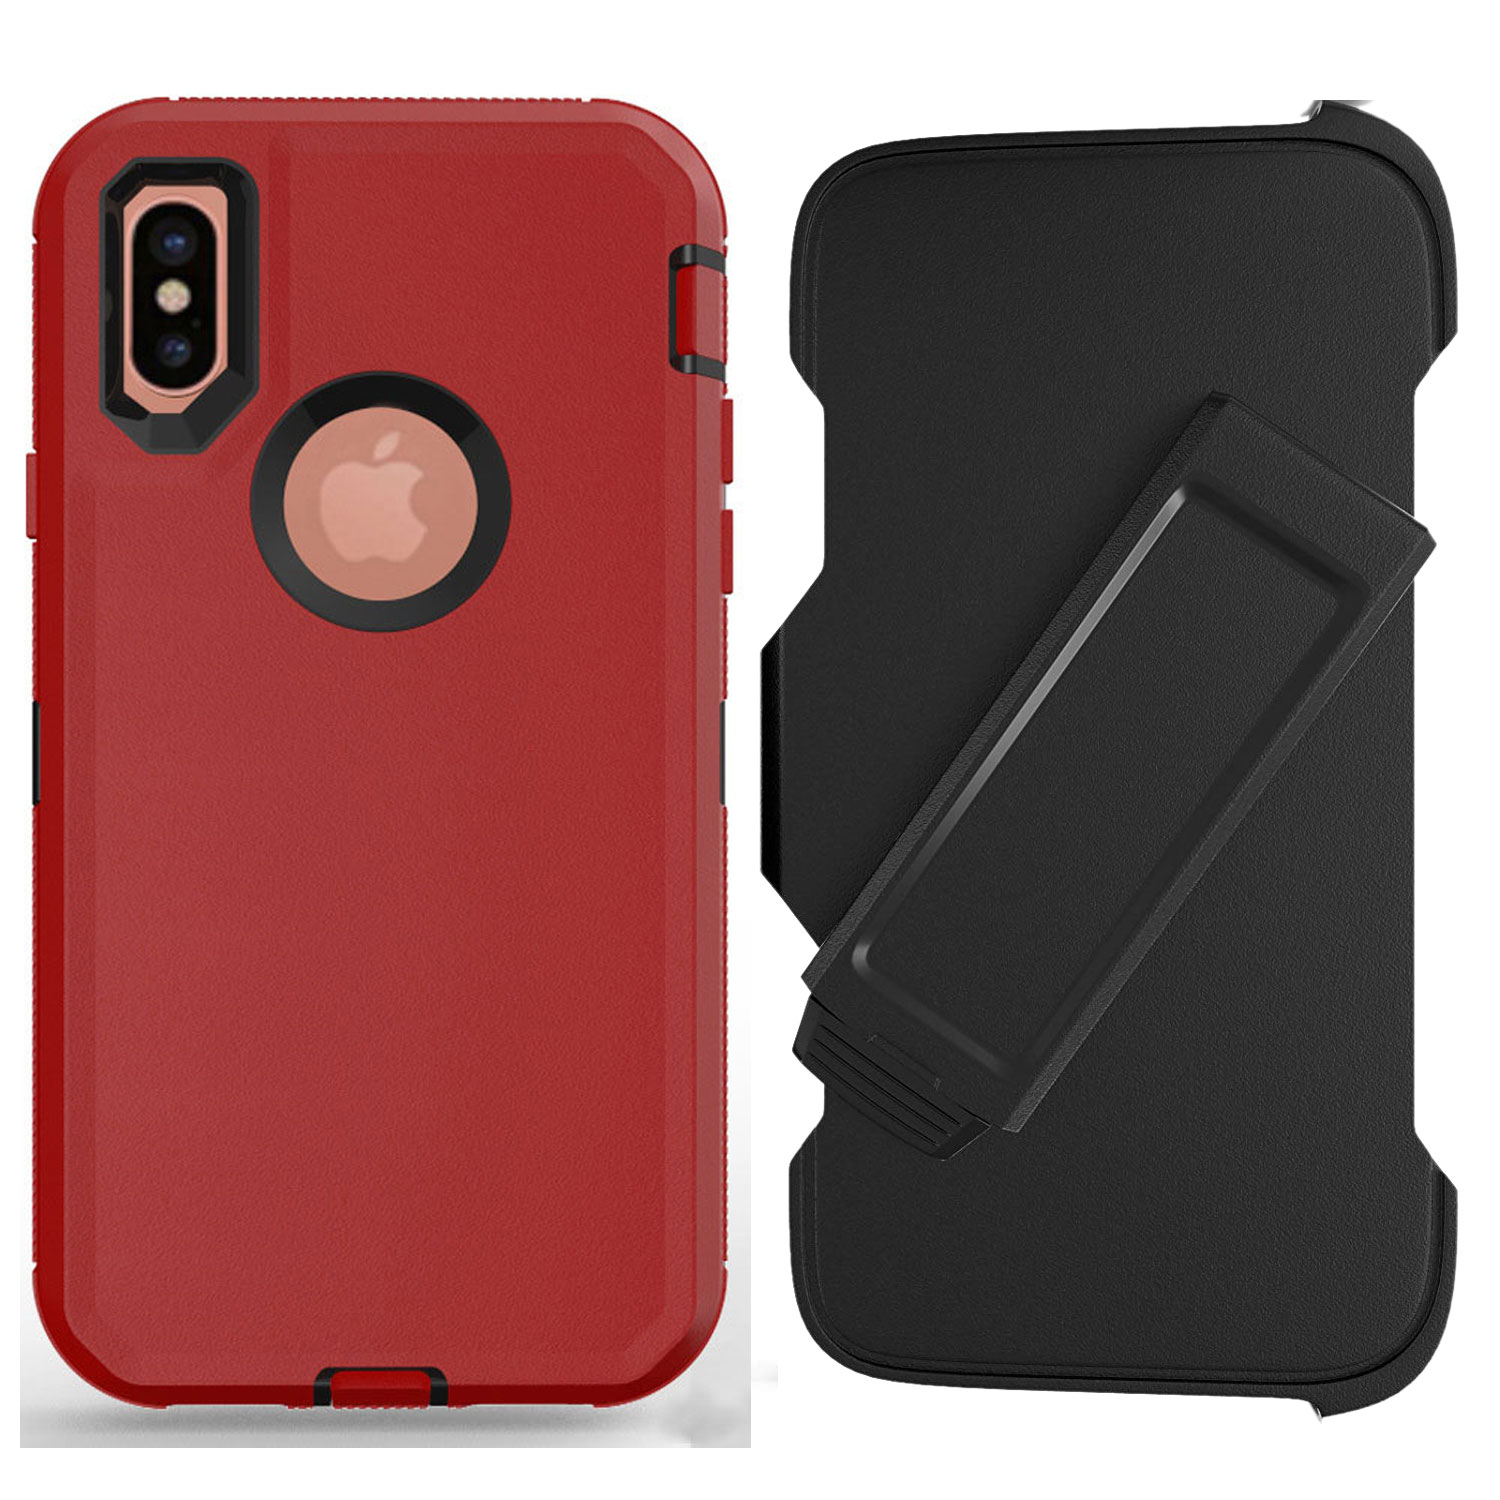 iPHONE Xs Max Armor Robot Case with Clip (Red Black)